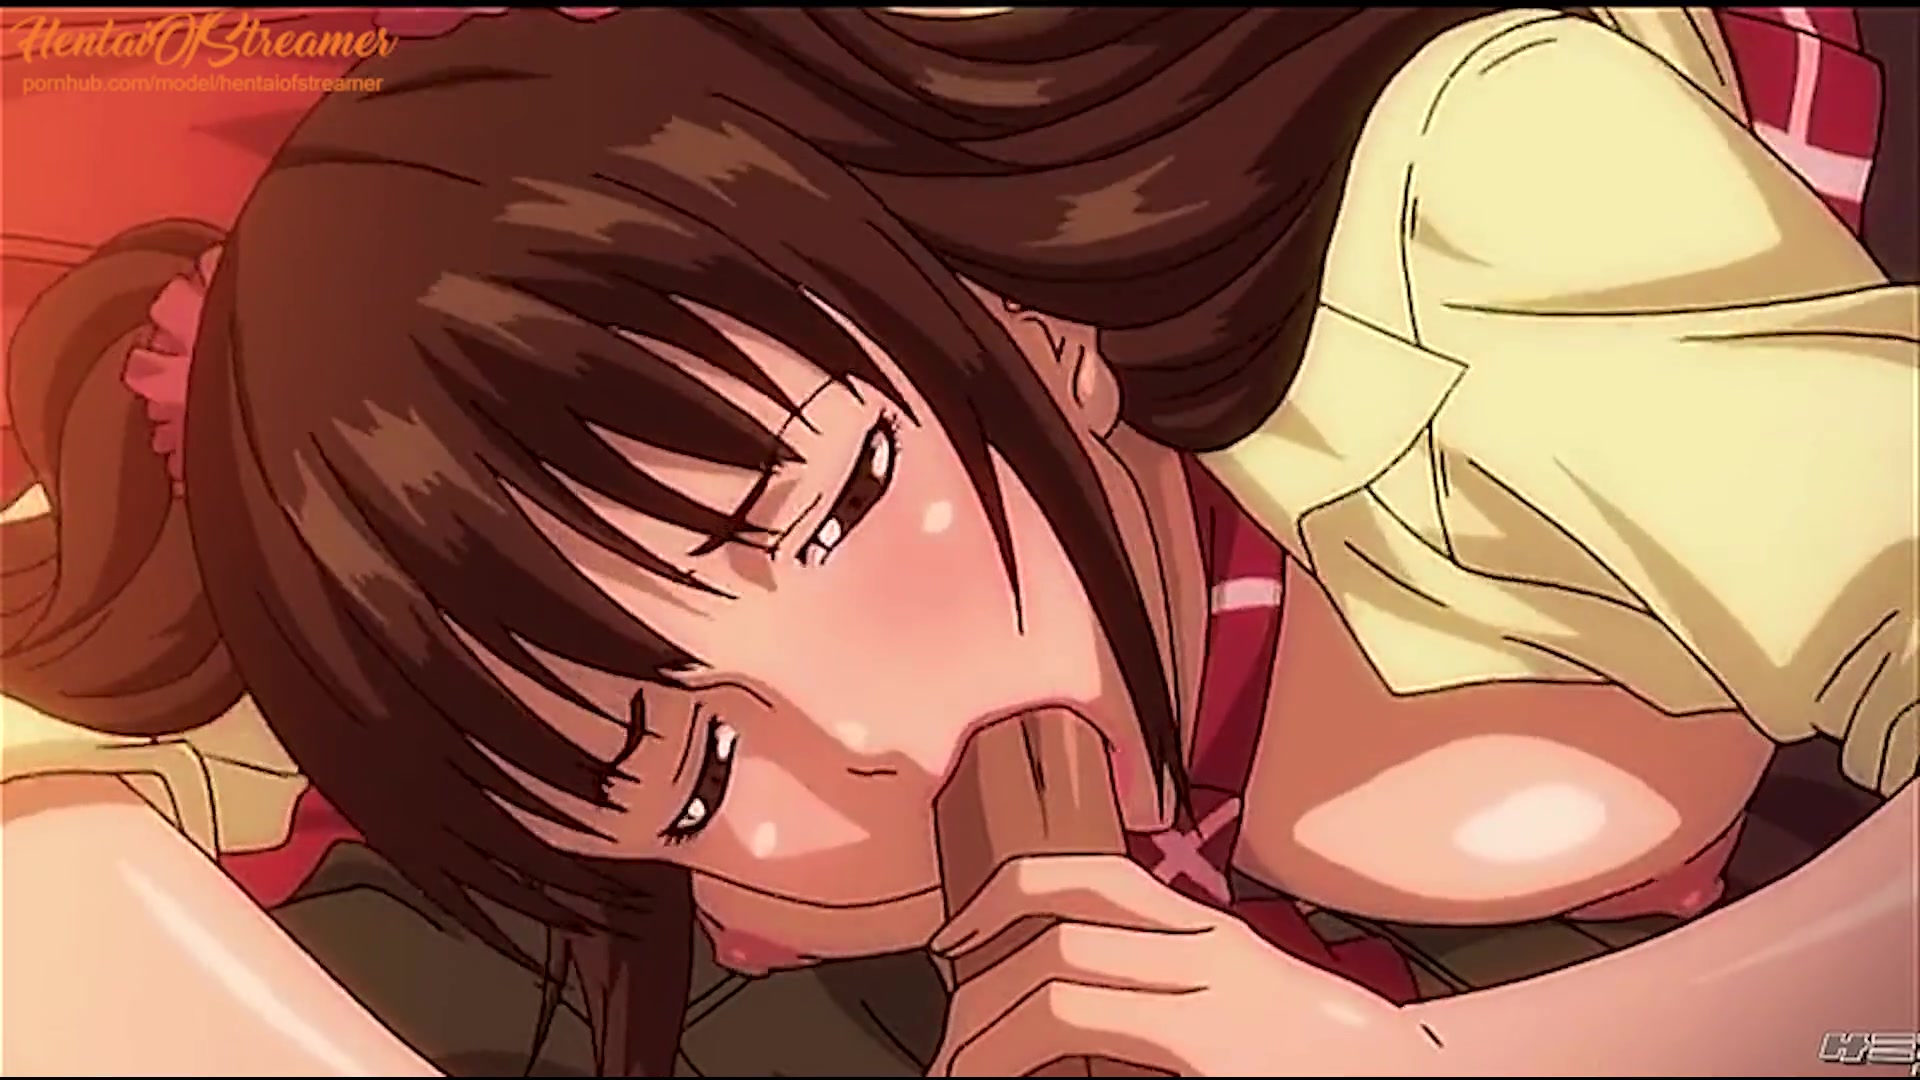 Anime Porn Uncensored - Hotwife Dude Sees his Gf Plumb and Deep-Throat off another Stud - Anime Porn, Anime pic photo